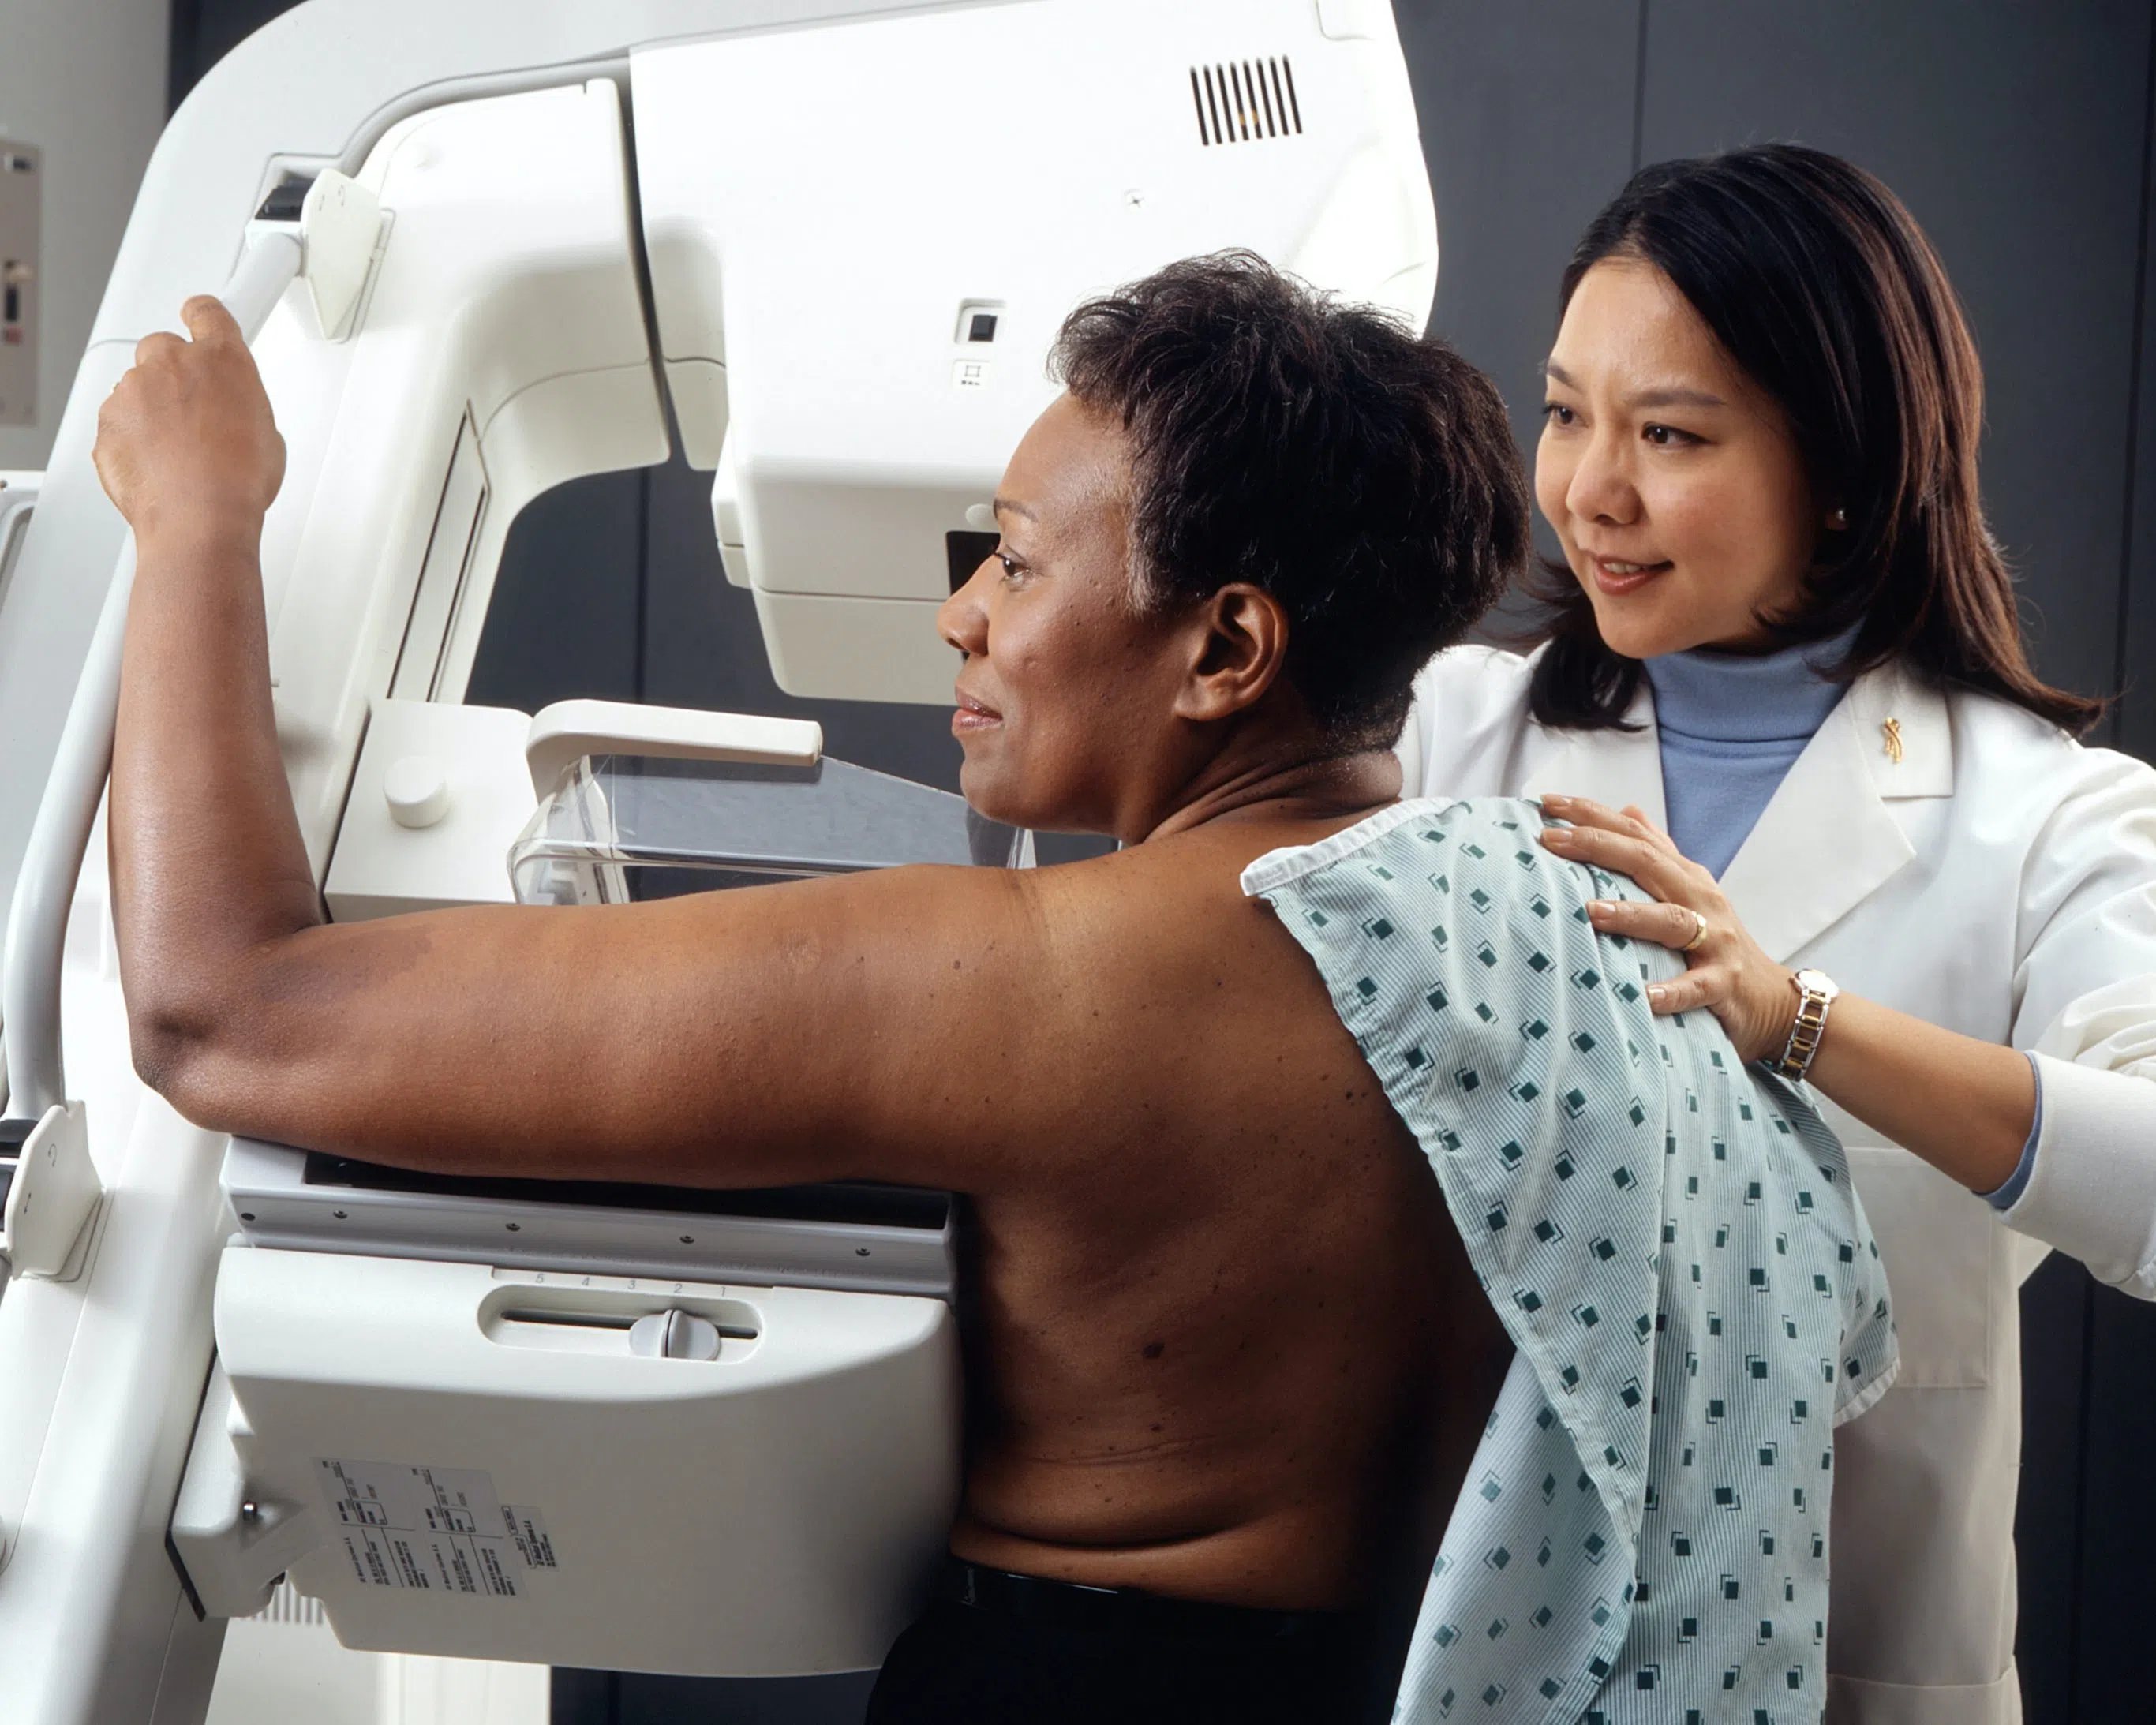 U.S. Preventive Services Task Force says begin mammograms at age 40